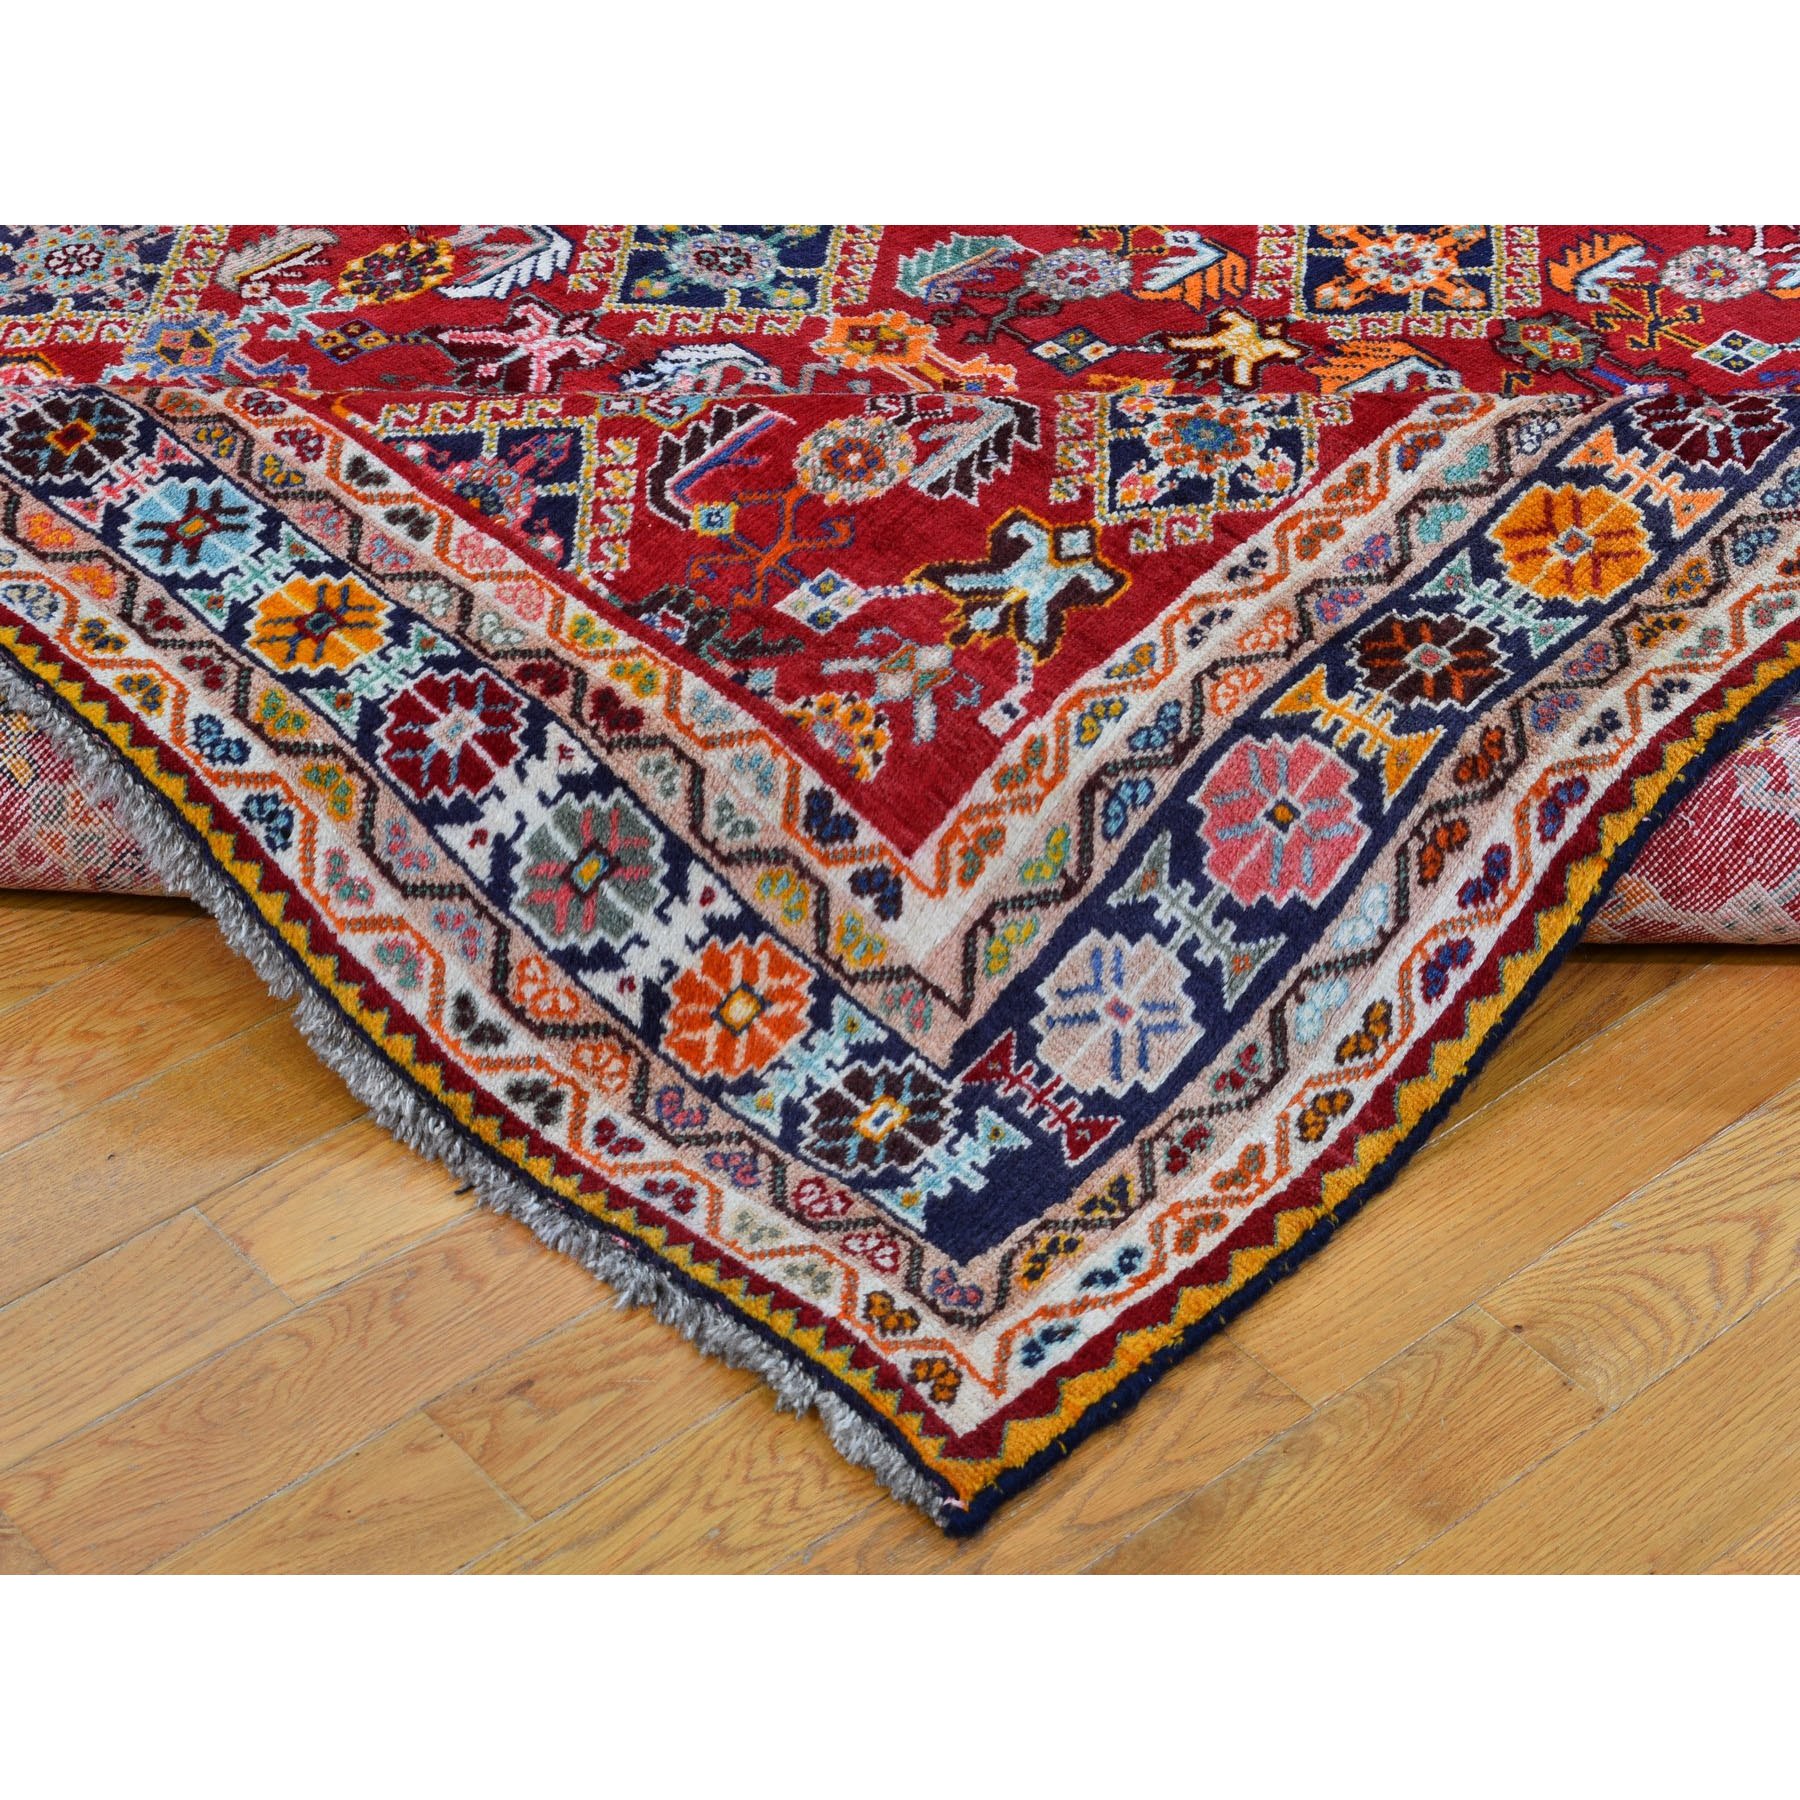 6-9 x10- Red Vintage Persian Shiraz Exc Cond Full Pile Pure Wool Hand Knotted Oriental Rug 